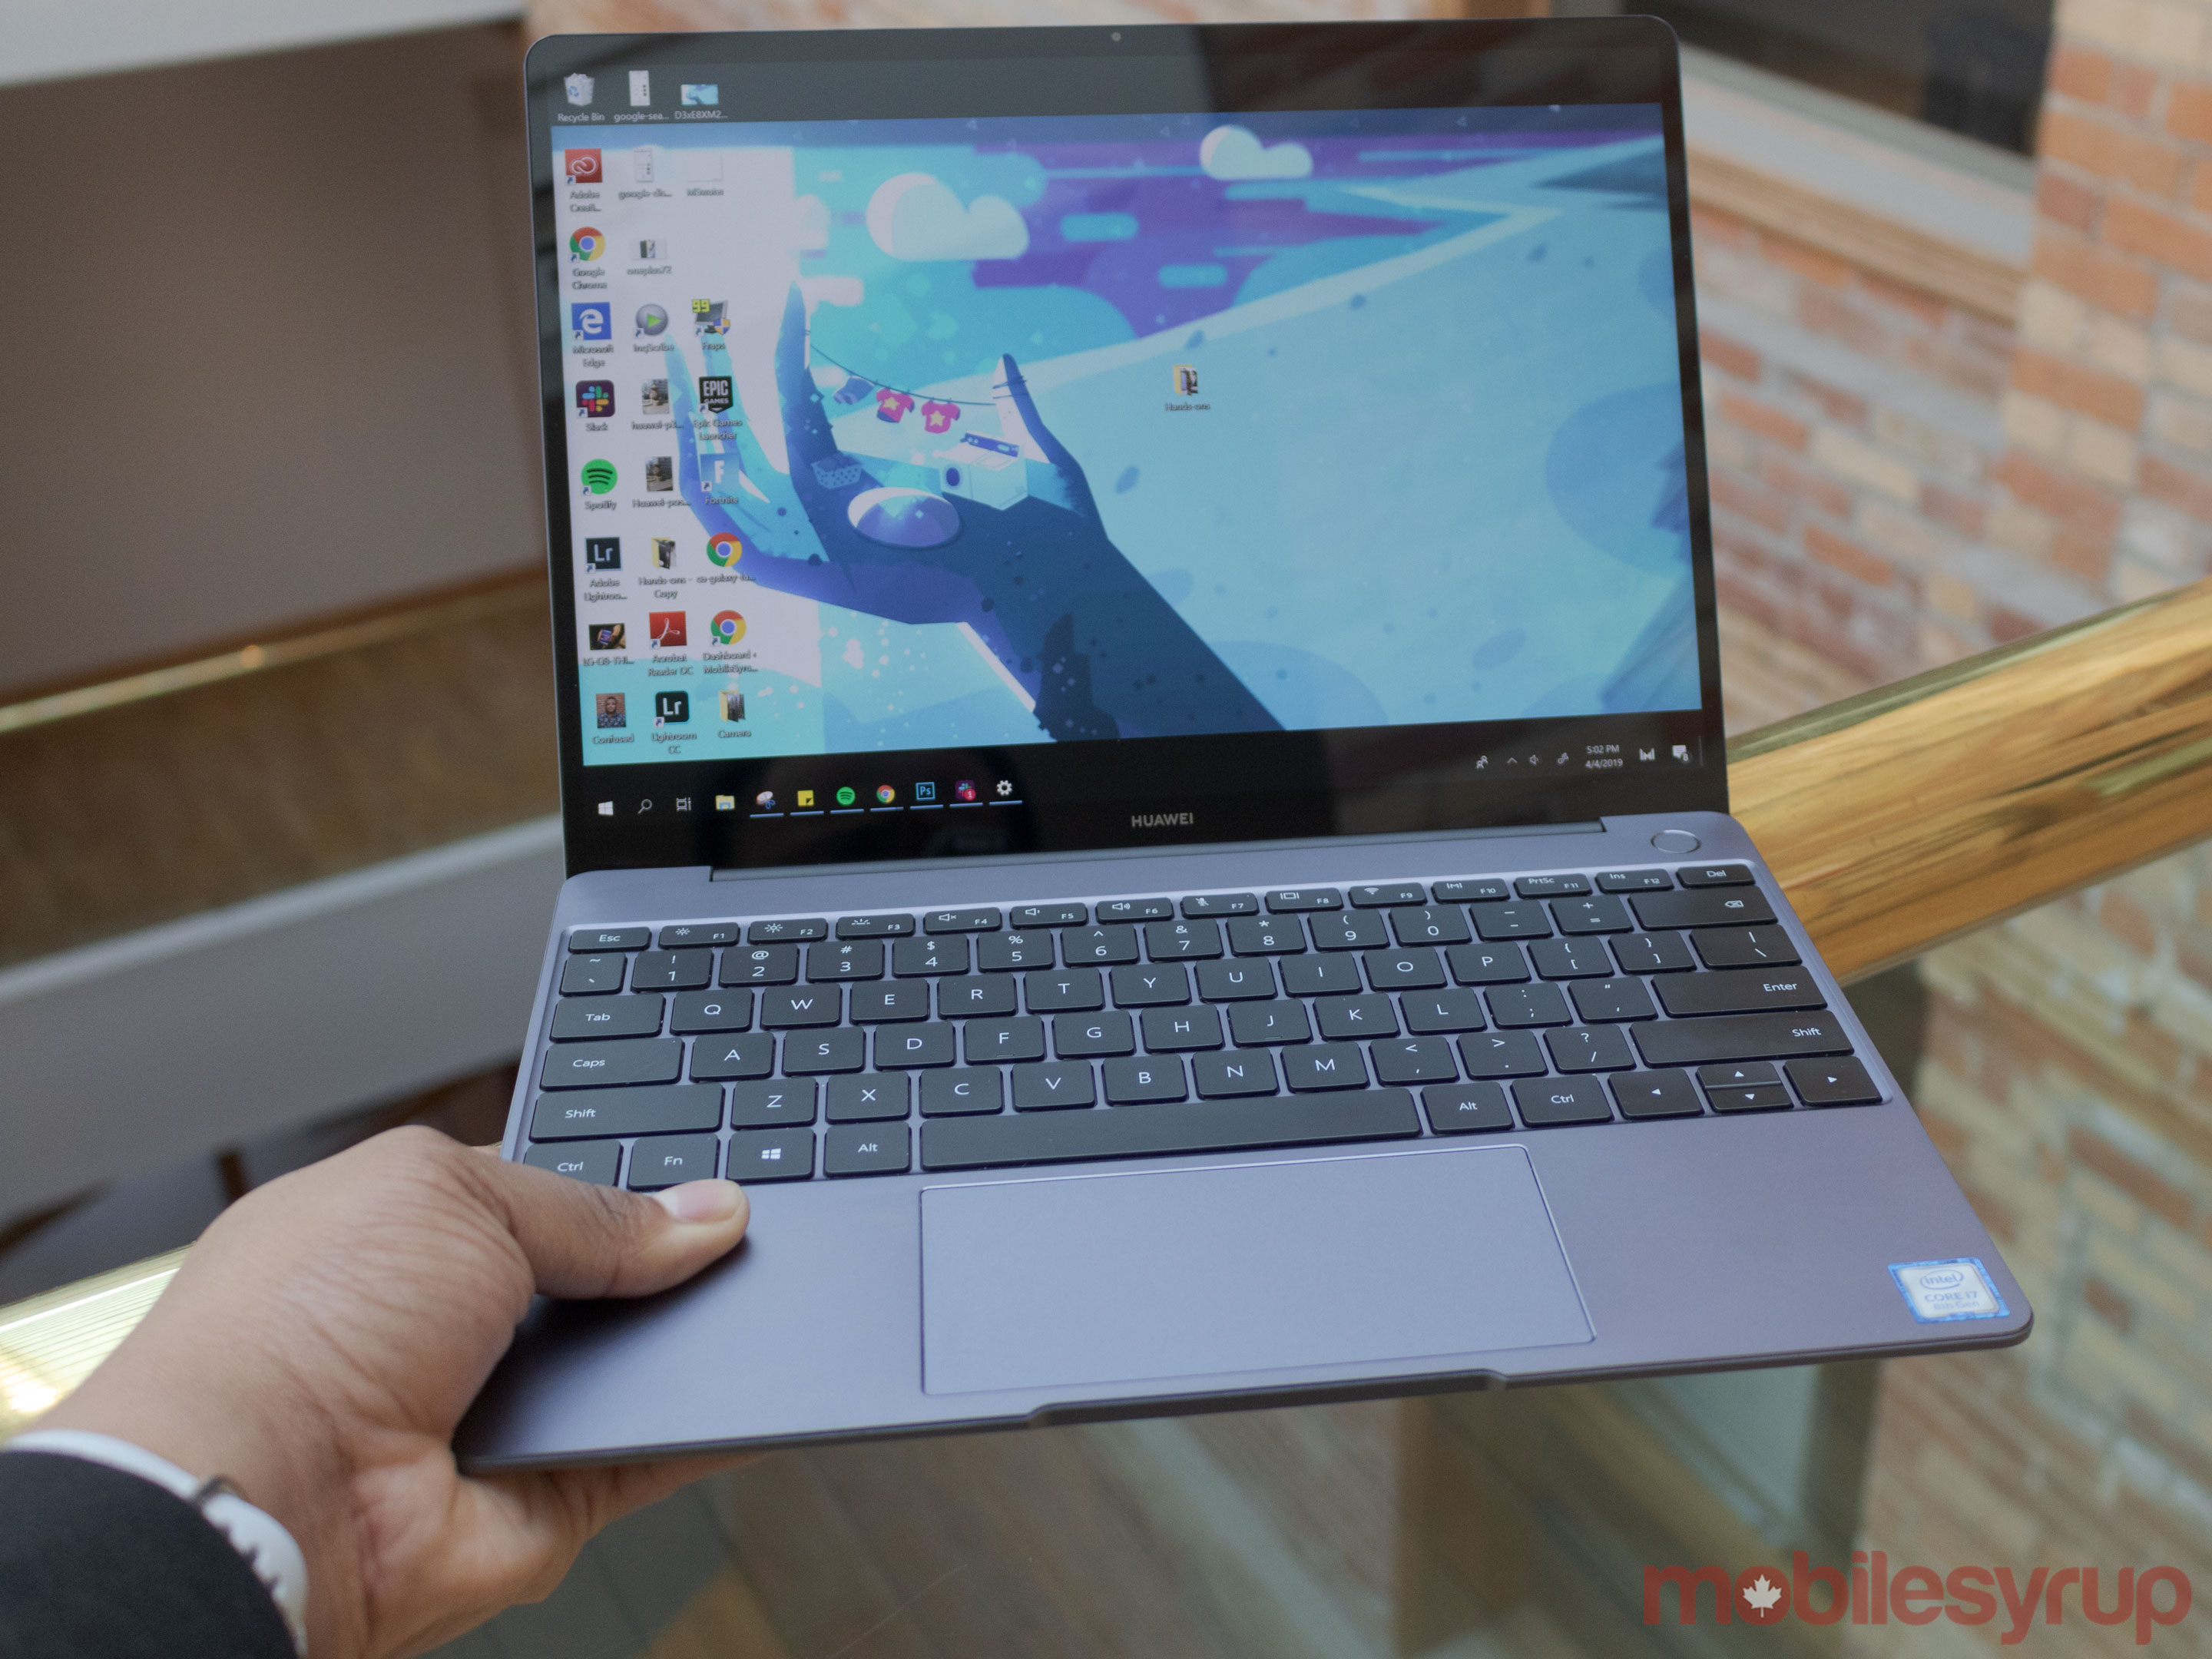 Huawei's MateBook 13 is solid, but it's not the MacBook it wants to be